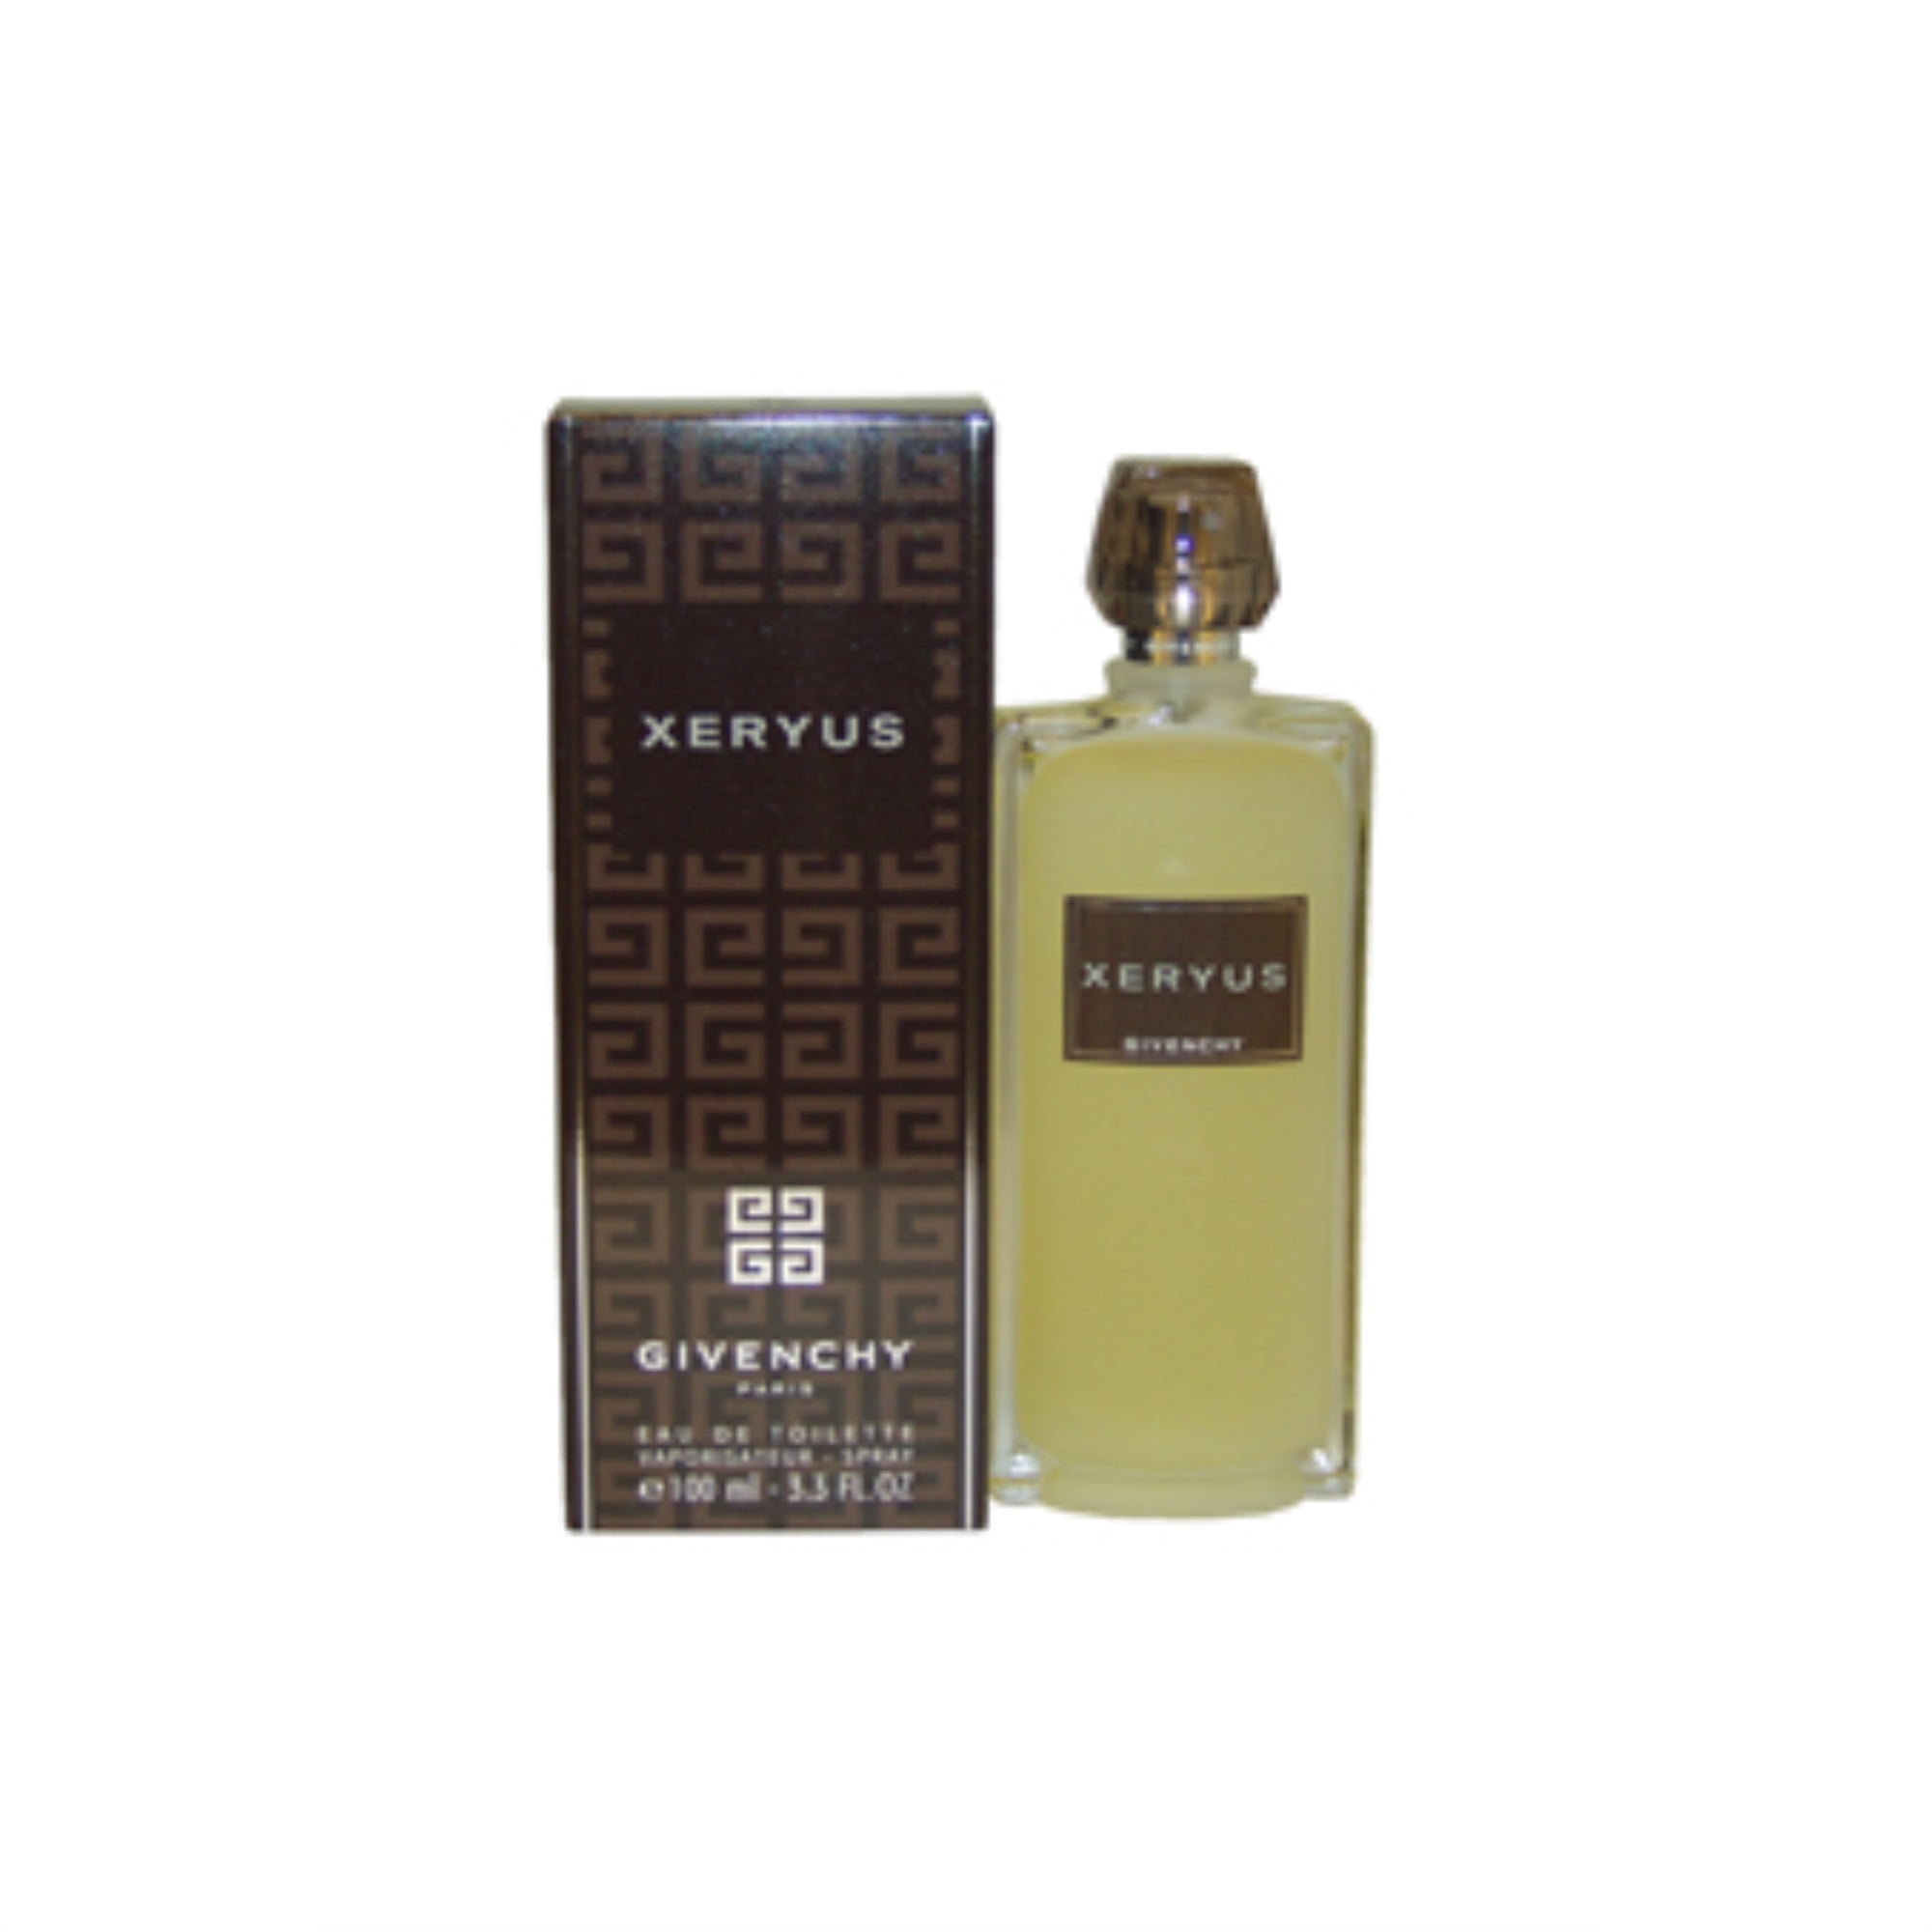 Givenchy Xeryus by Givenchy for Men  oz EDT Spray | Walmart Canada